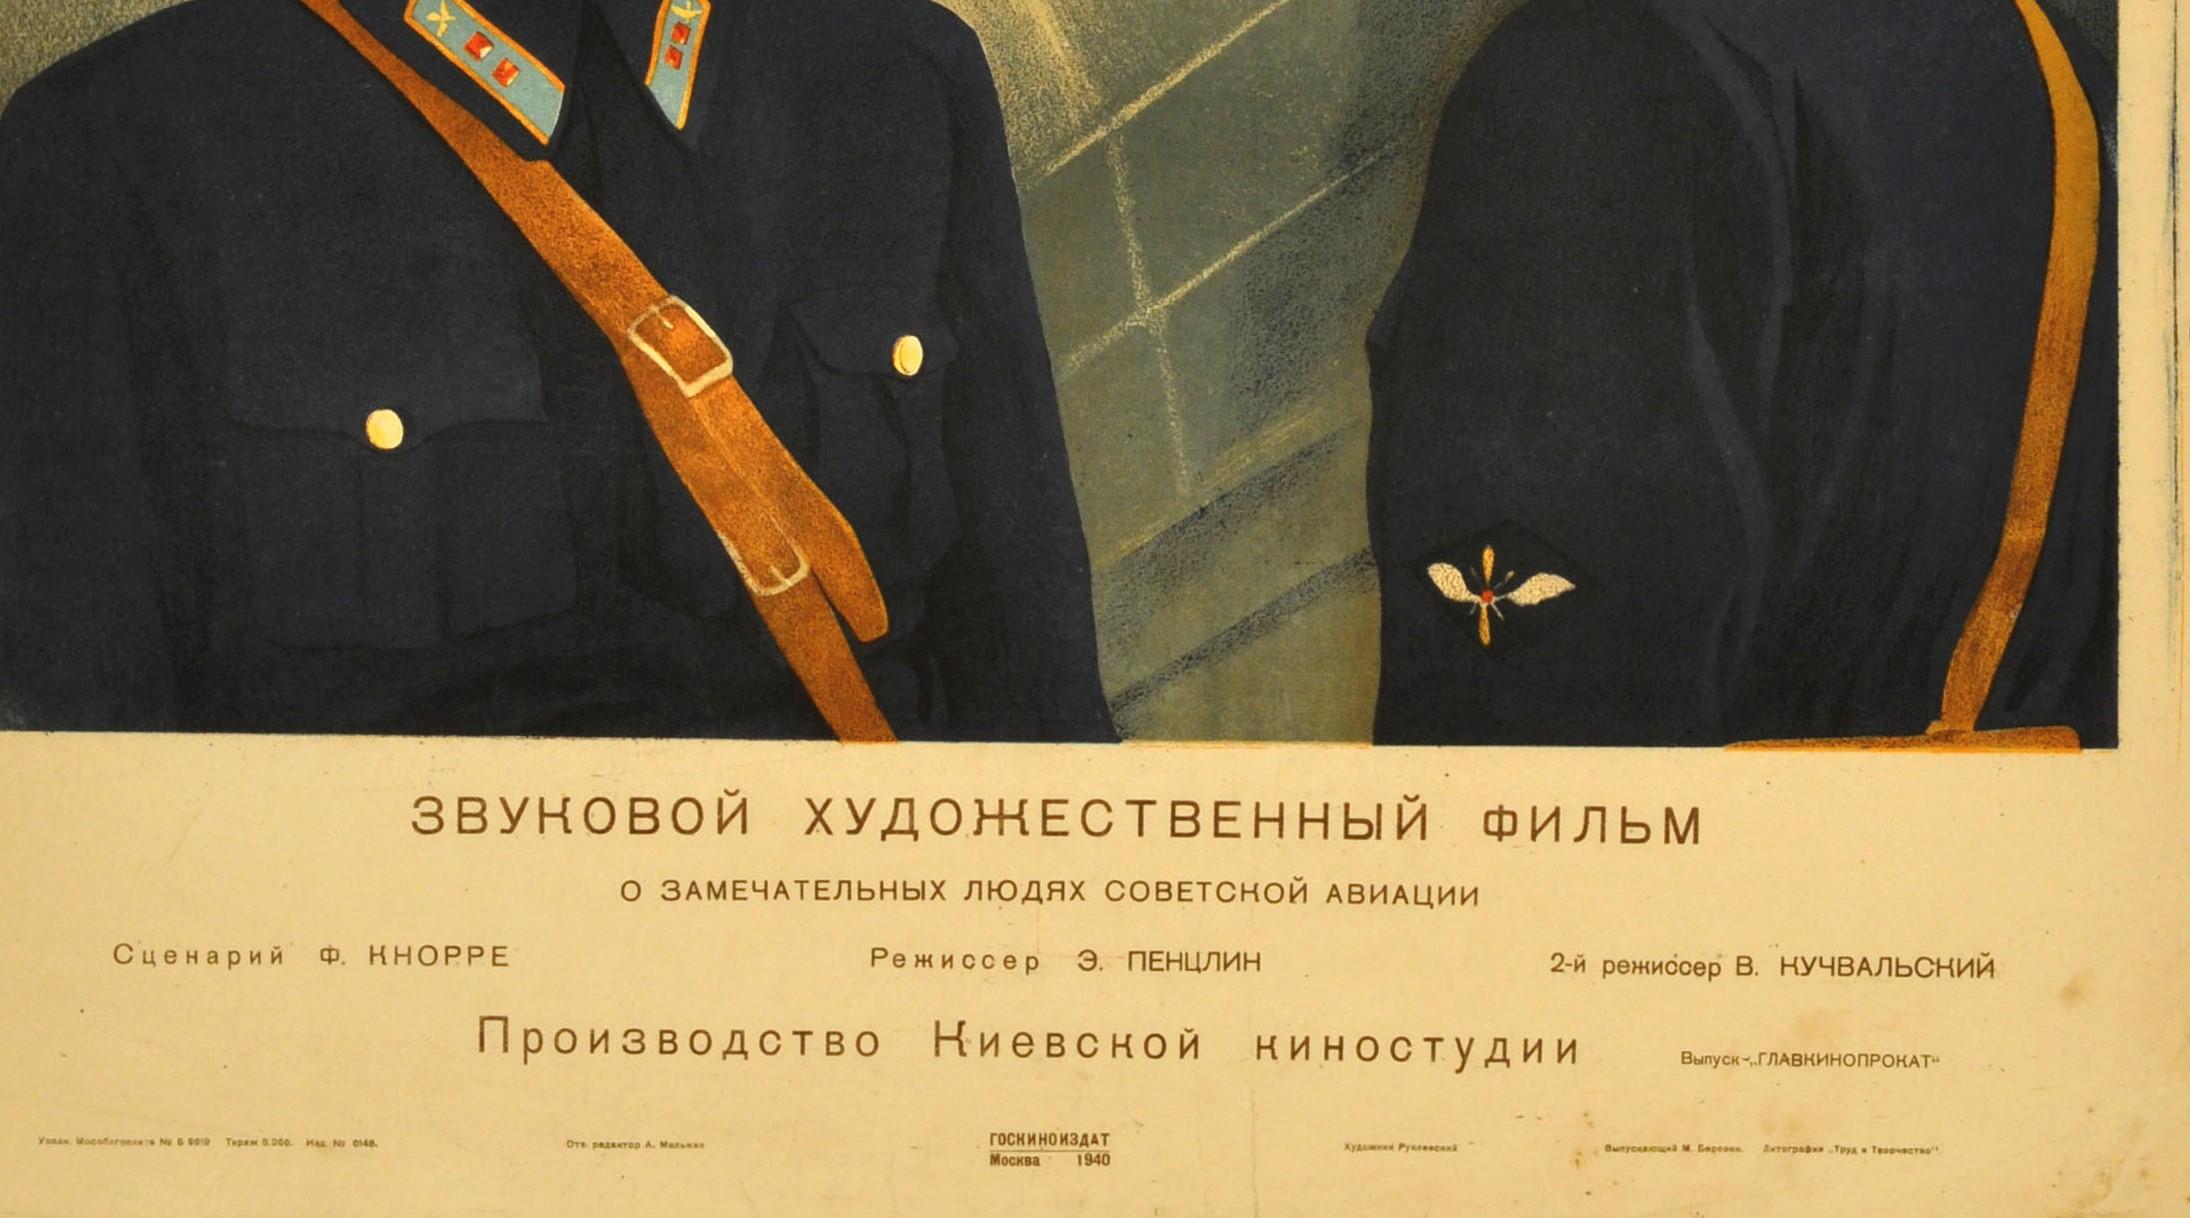 Russian Original Rare Movie Poster for a Film about the Soviet Air Force Fighter Pilots